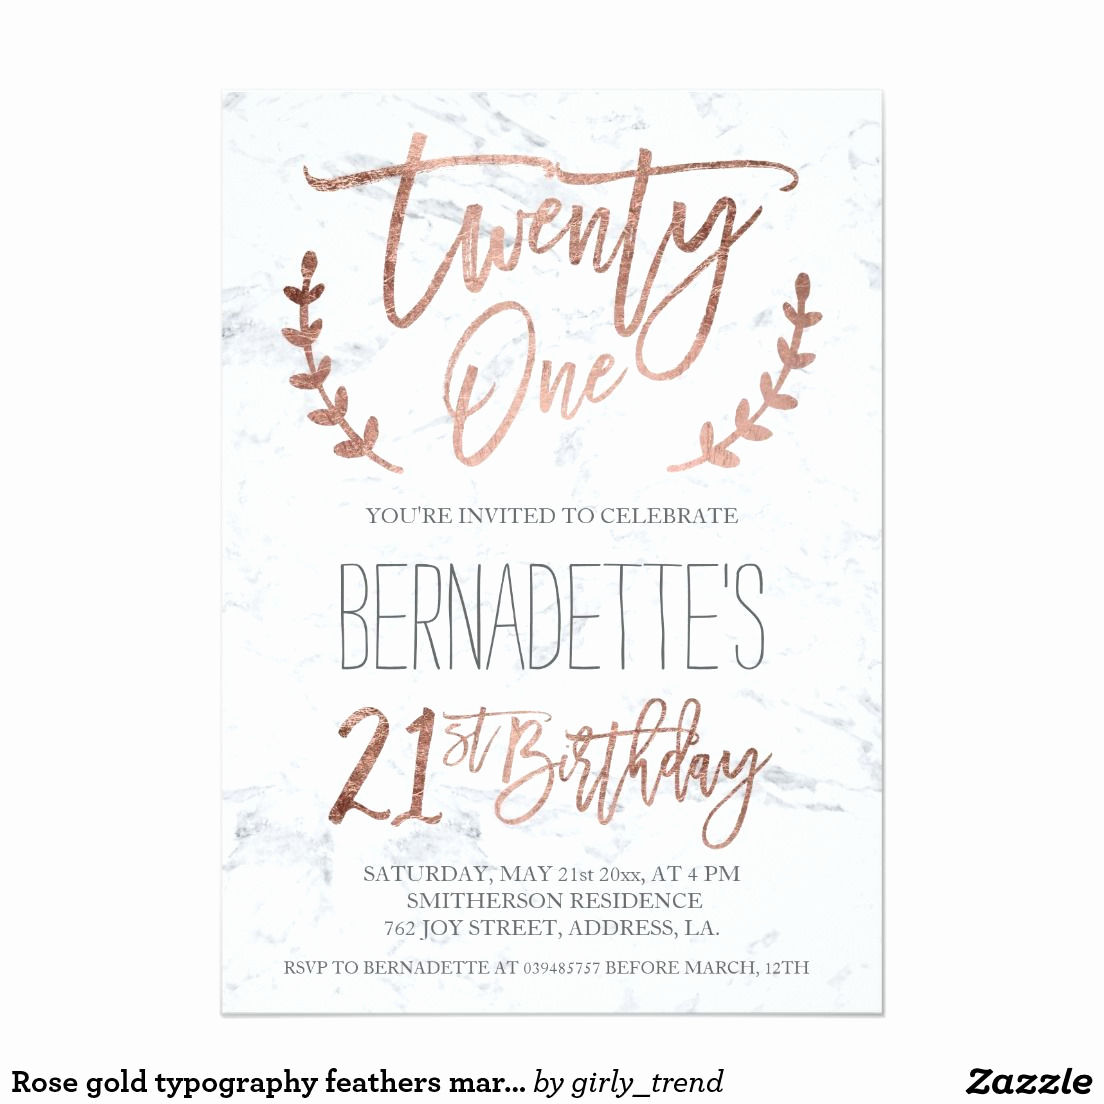 21st Birthday Invitation Ideas Lovely Rose Gold Typography Feathers Marble 21st Birthday